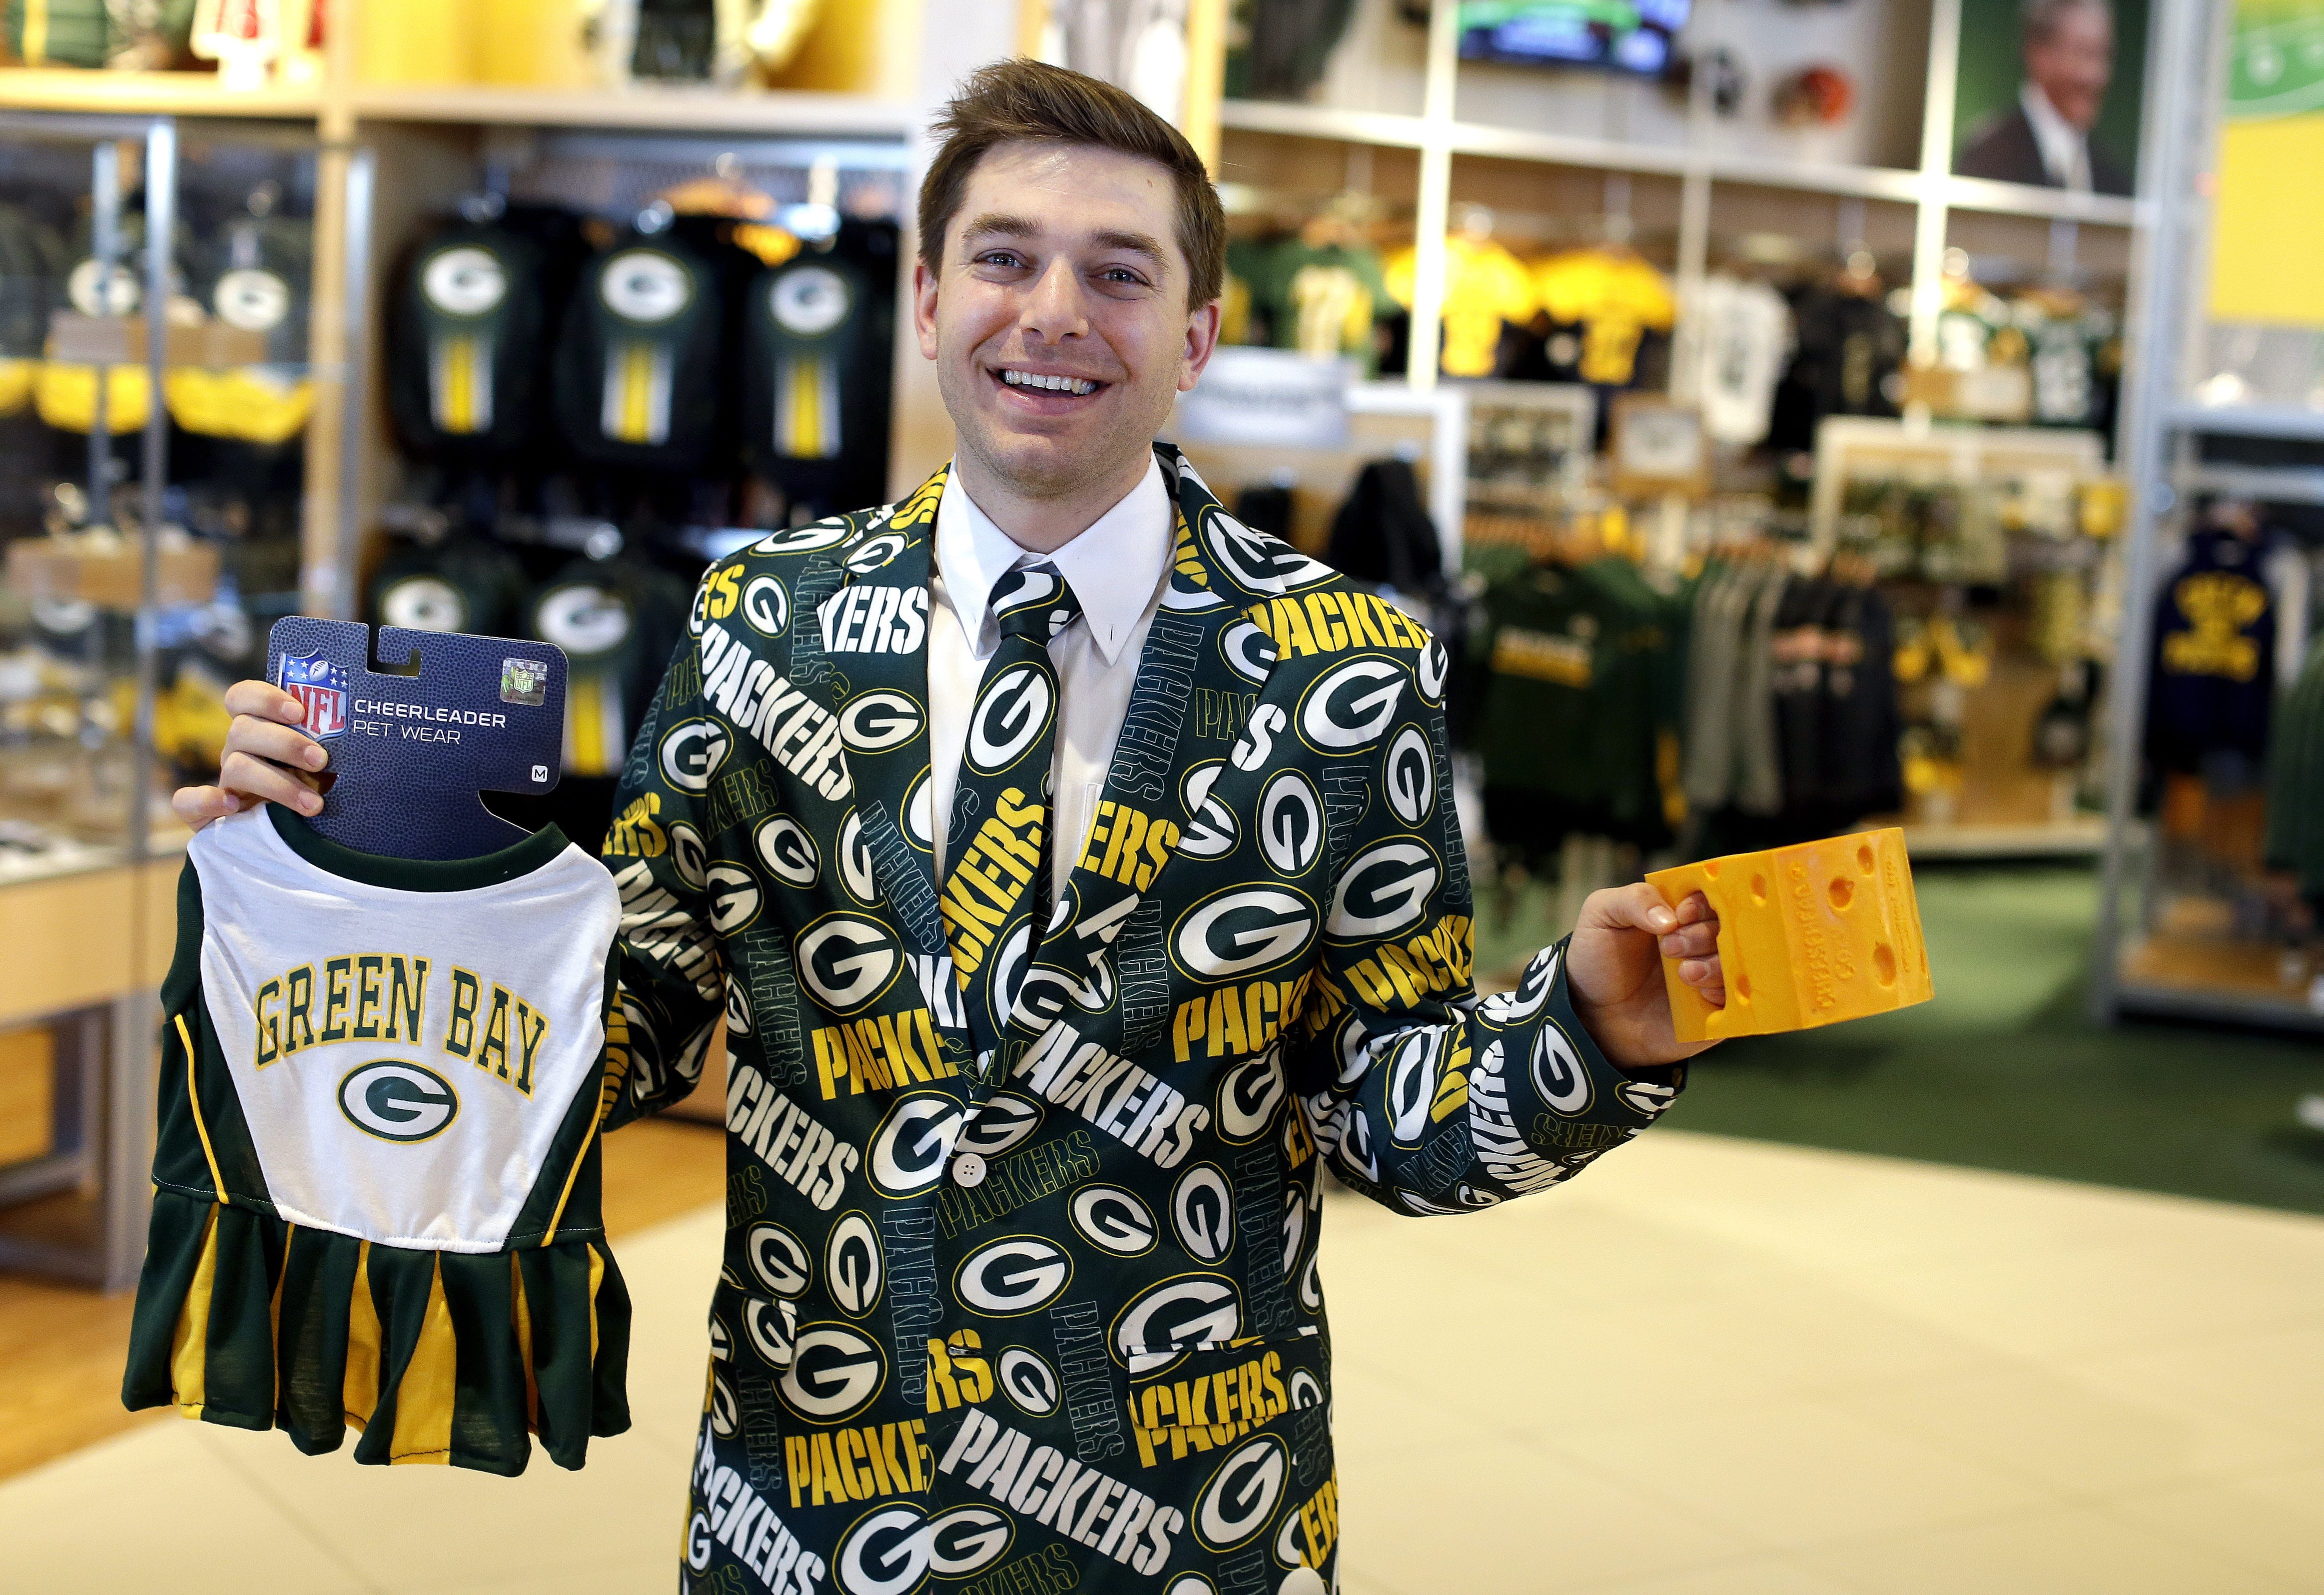 green bay packers pro shop